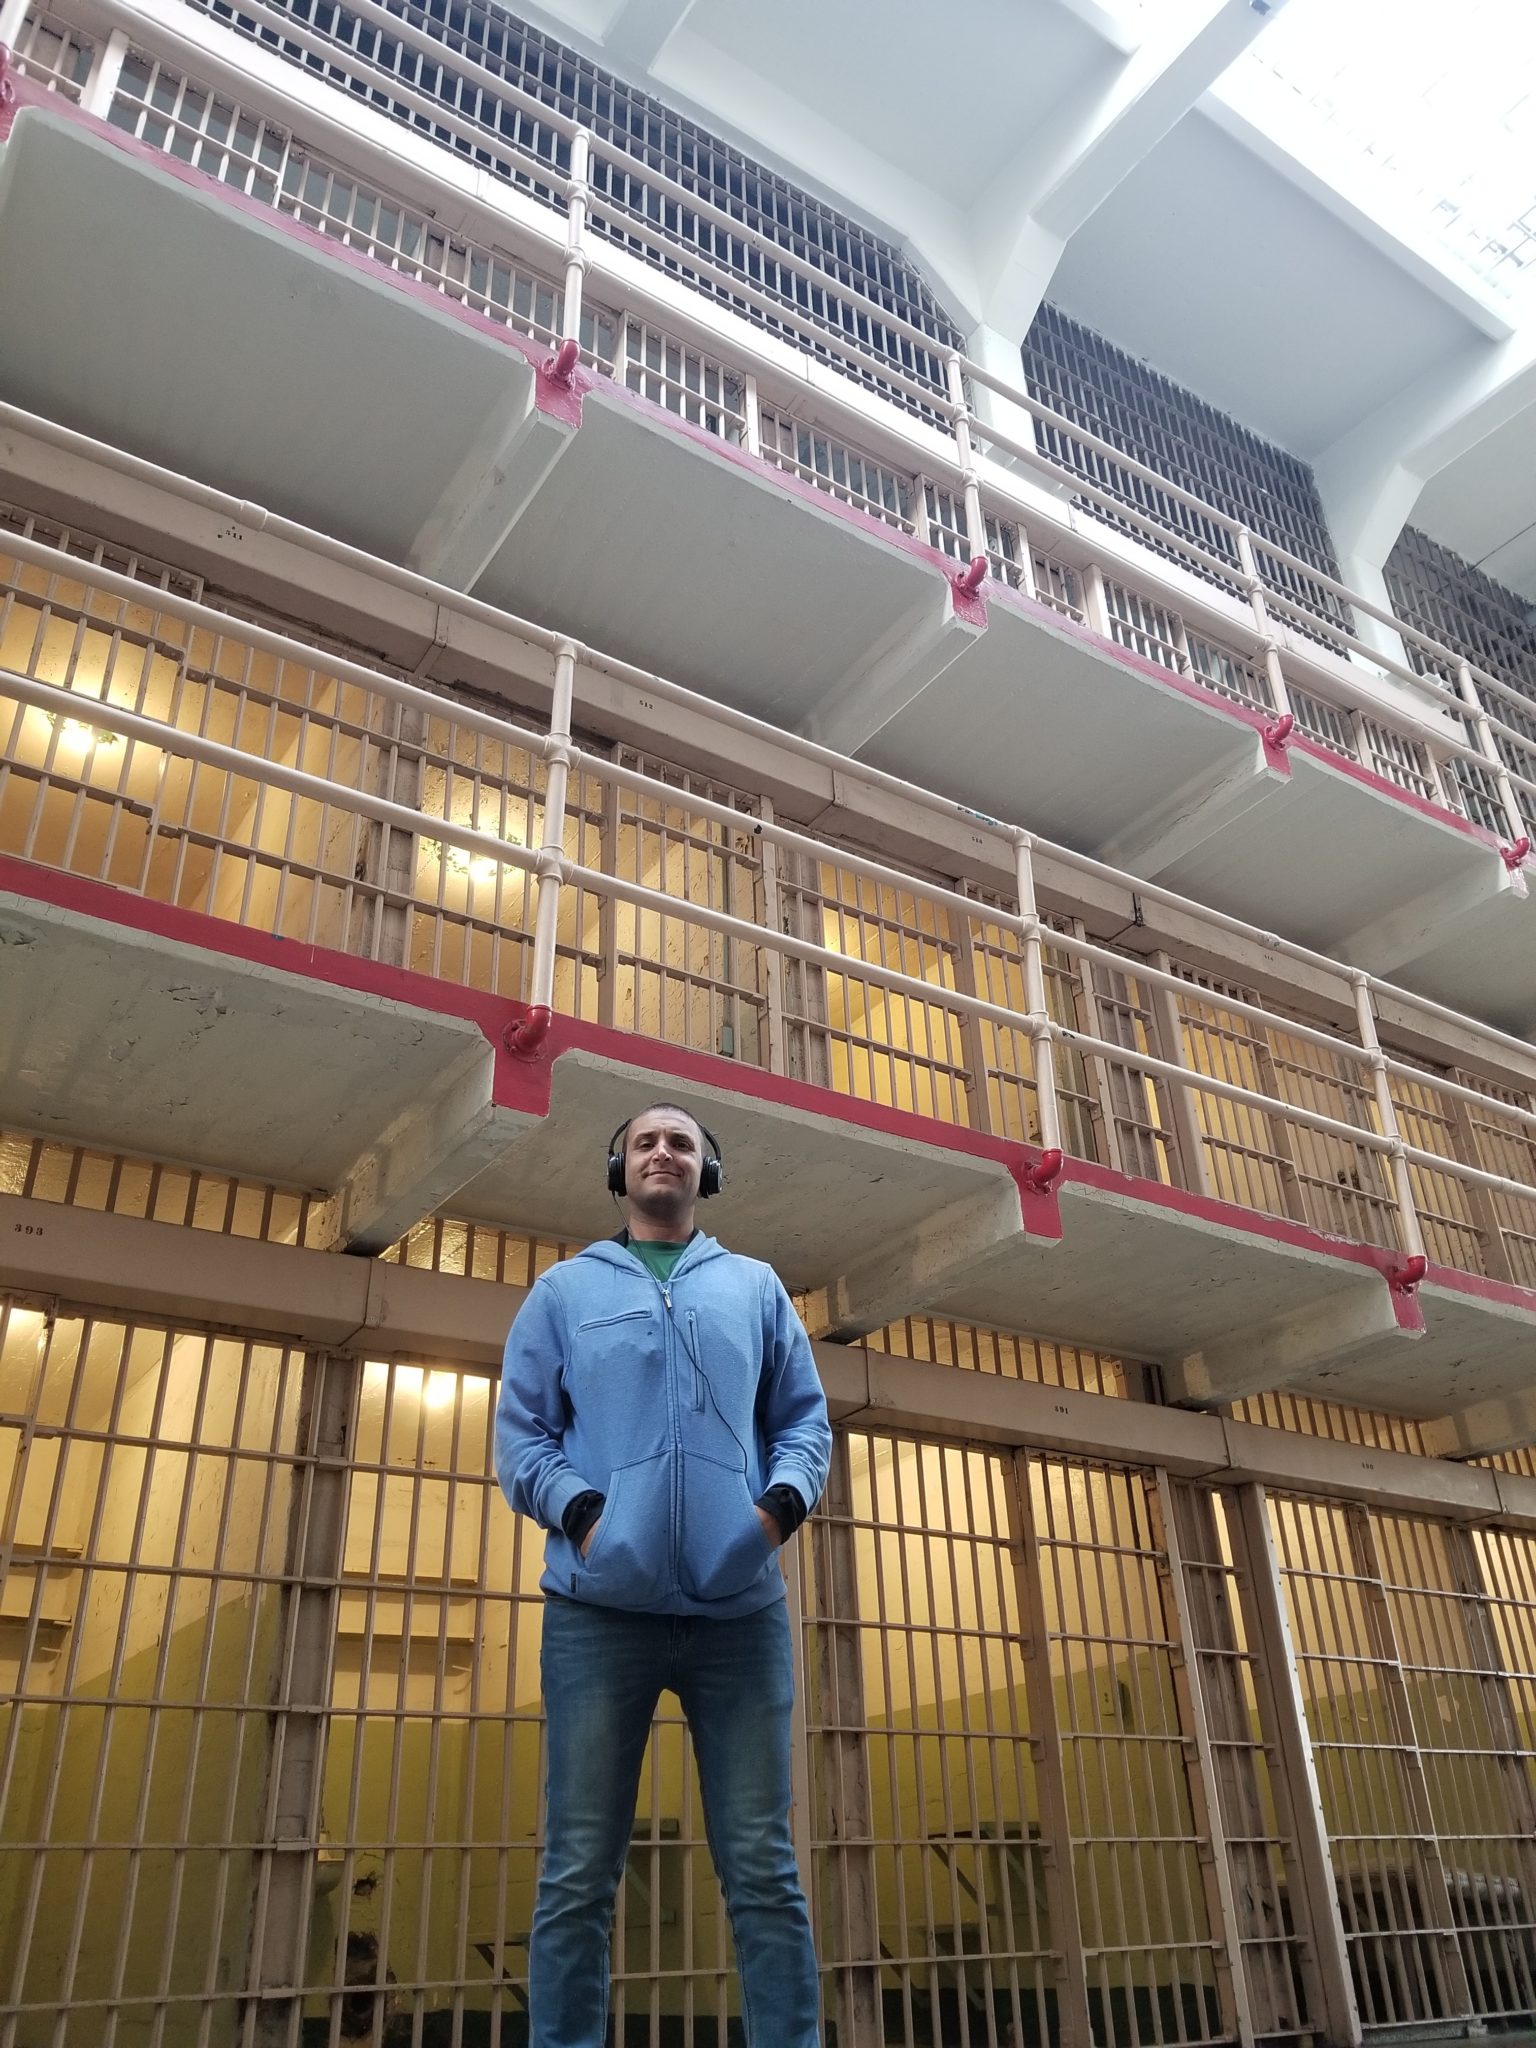 a man standing in front of a building with bars and windows